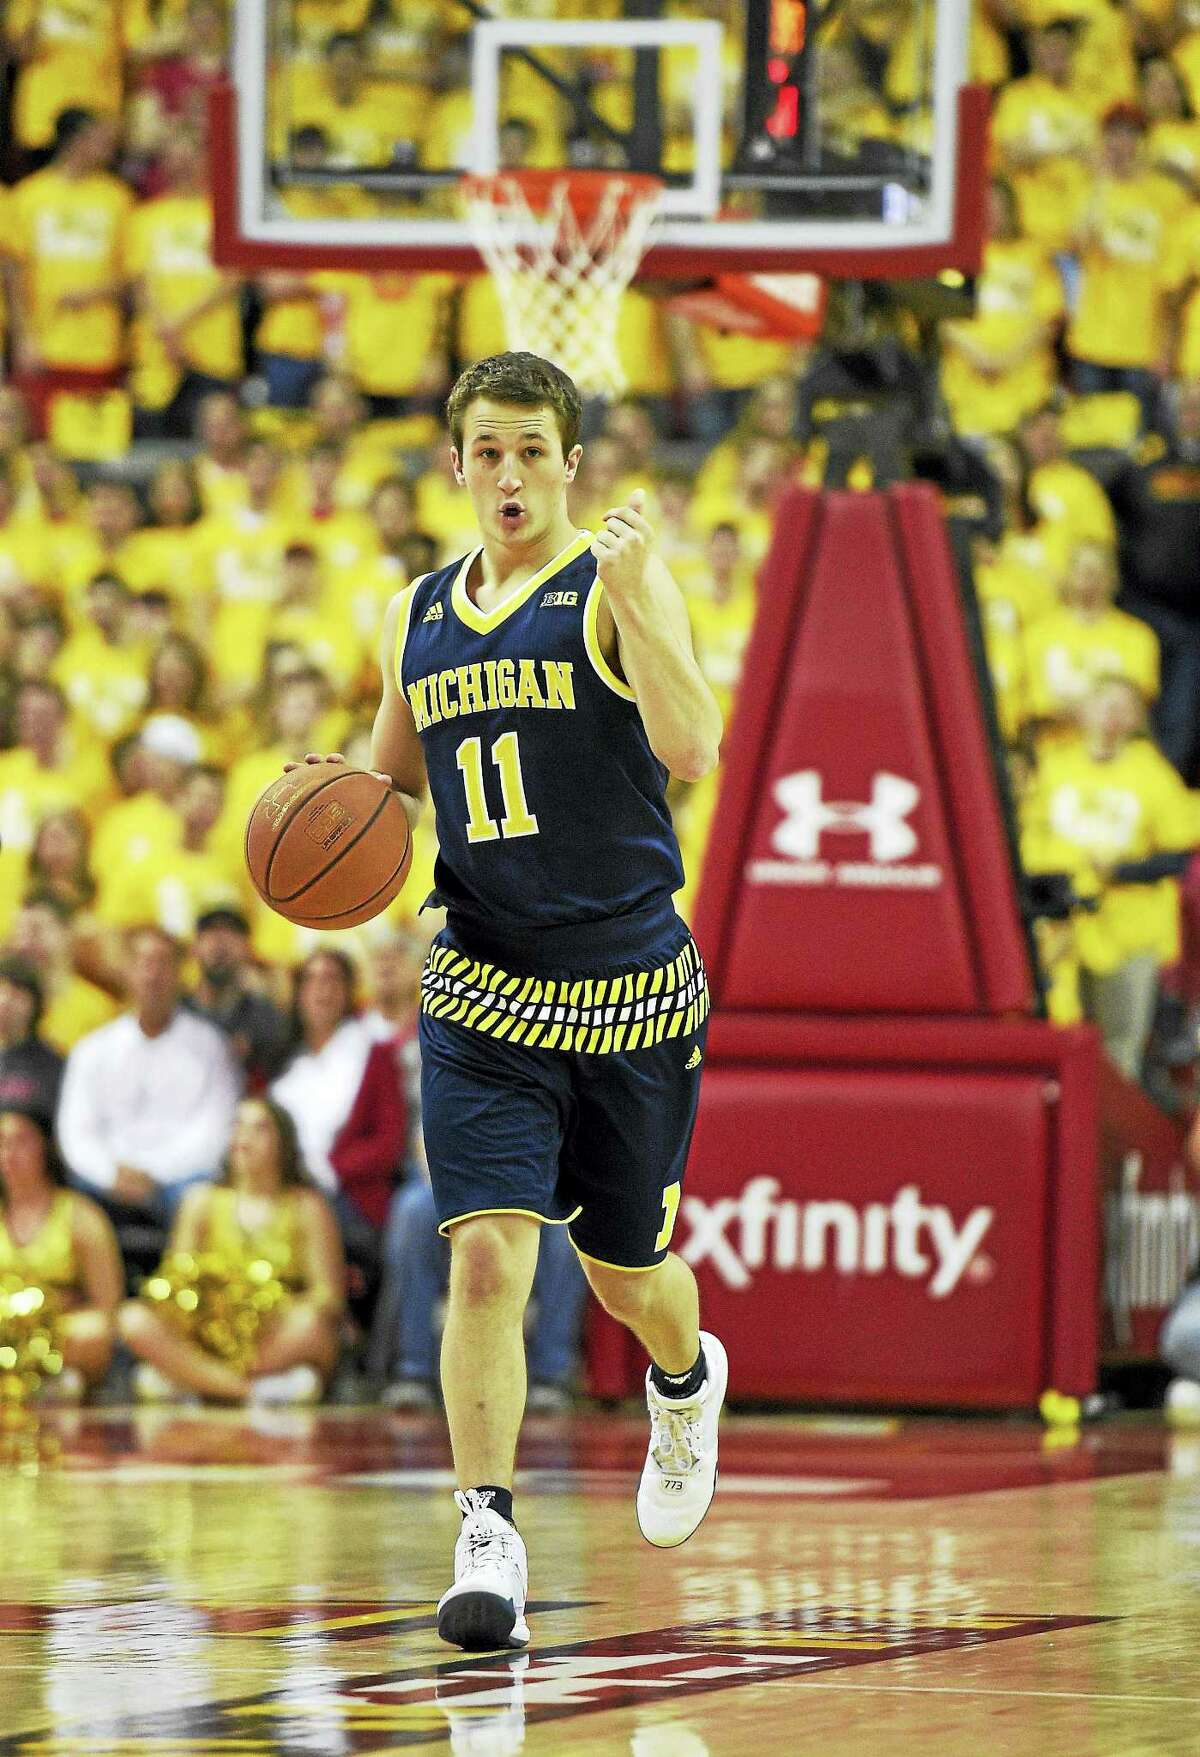 Former Michigan guard Andrew Dakich has backed out of a decision to play at Quinnipiac and instead will play at Ohio State.